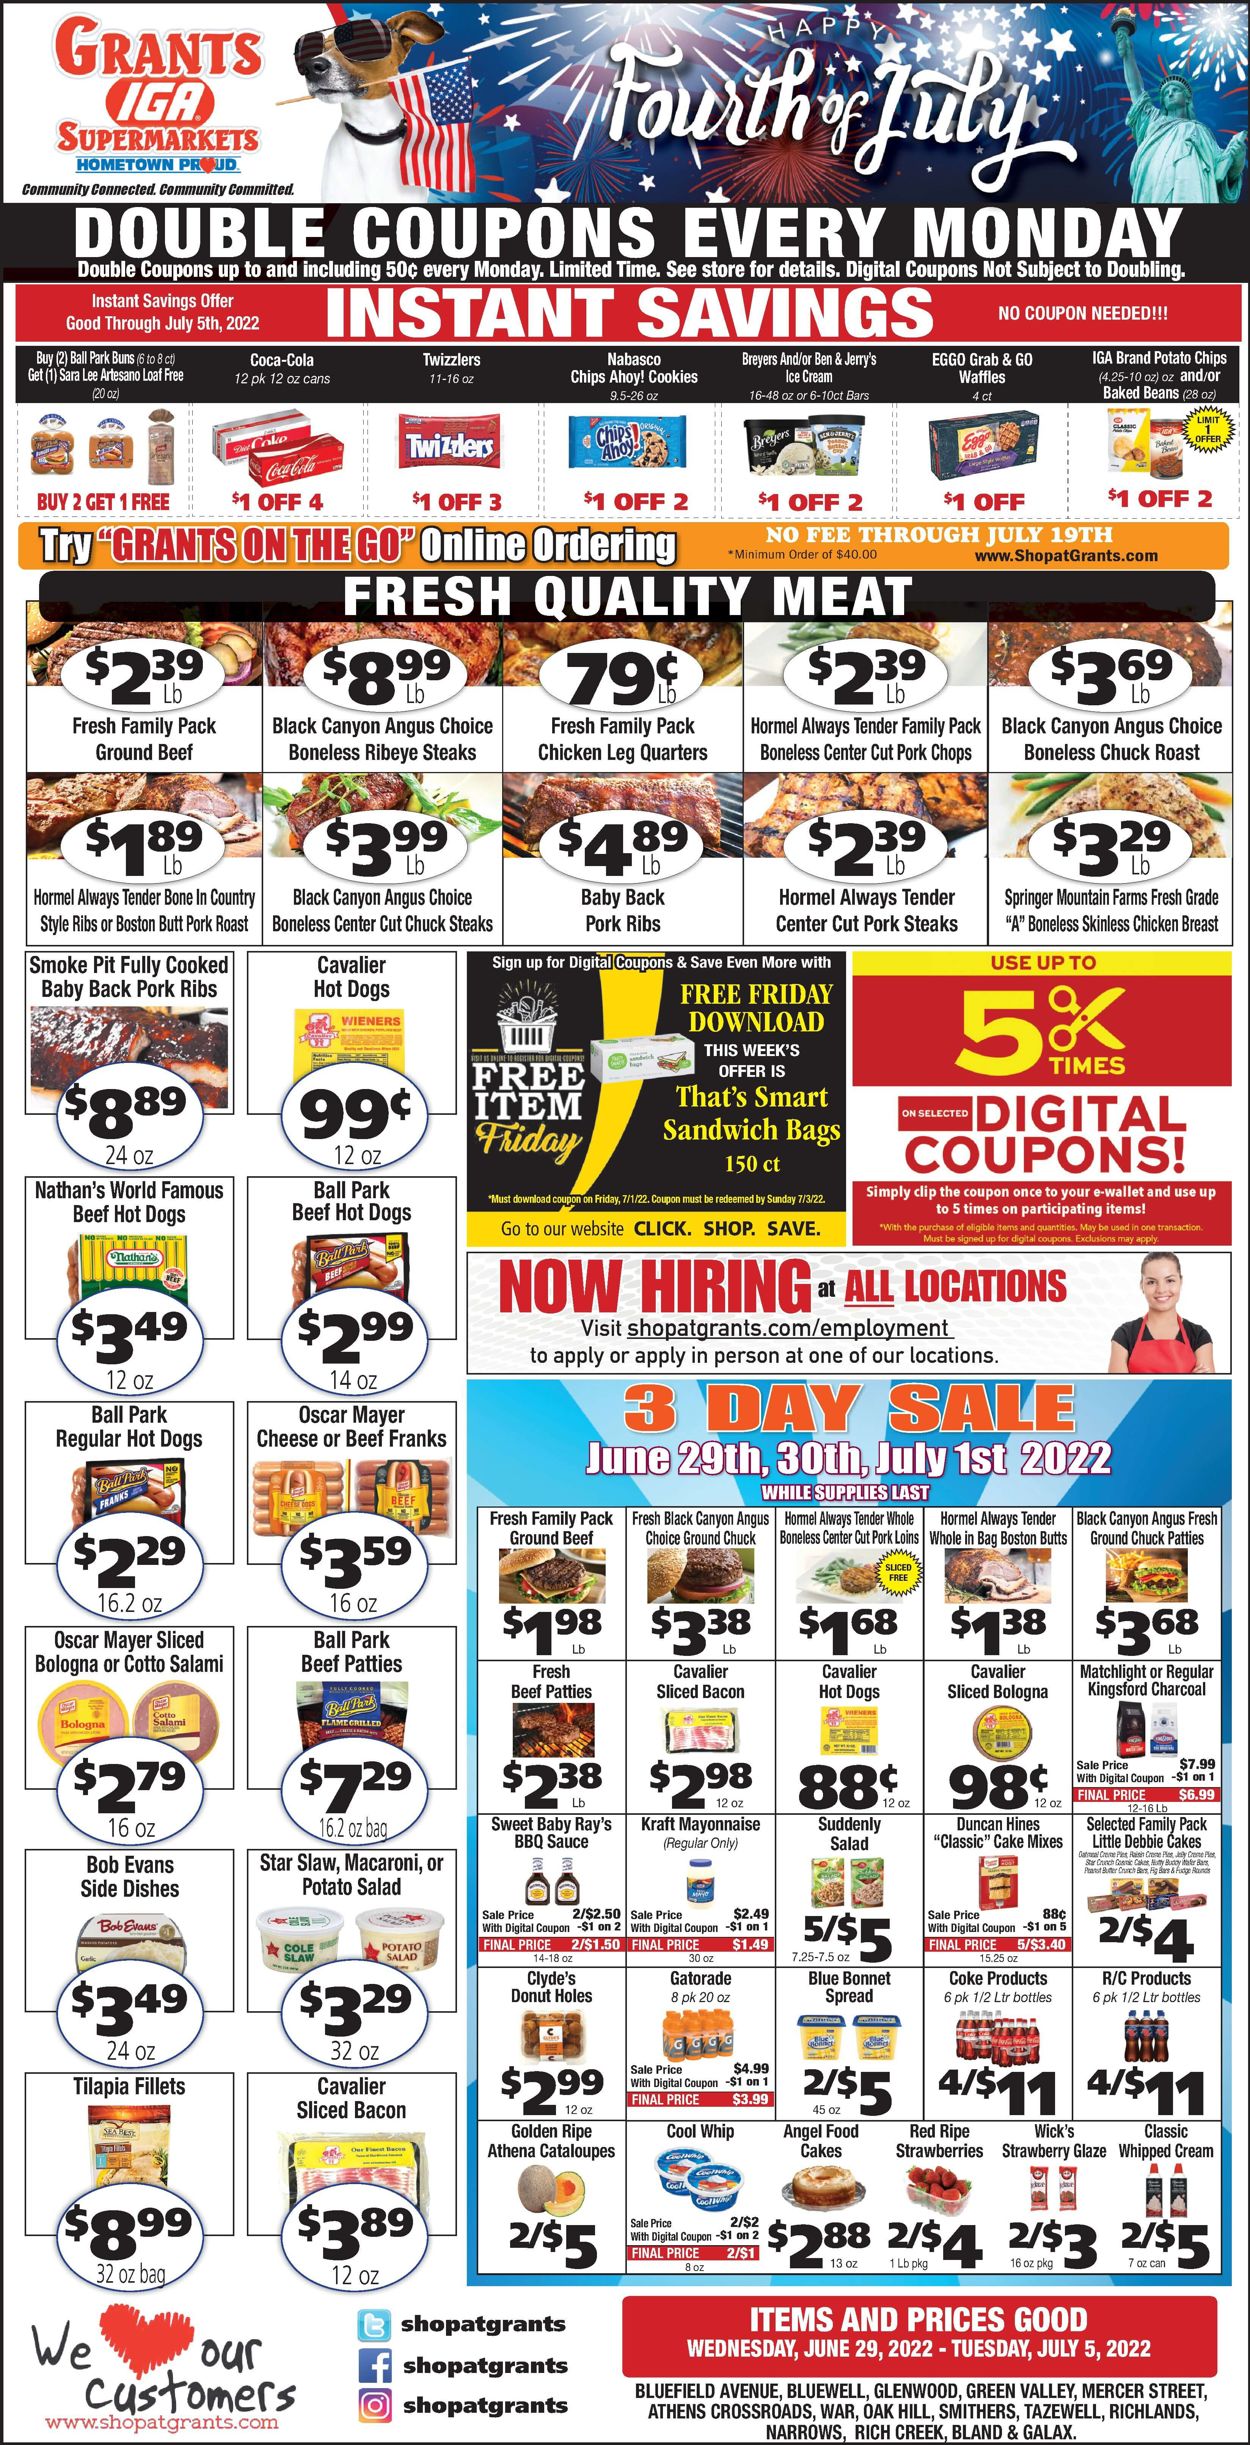 Grant's Supermarket - 4th of July Sale Weekly Ad Circular - valid 06/29-07/05/2022